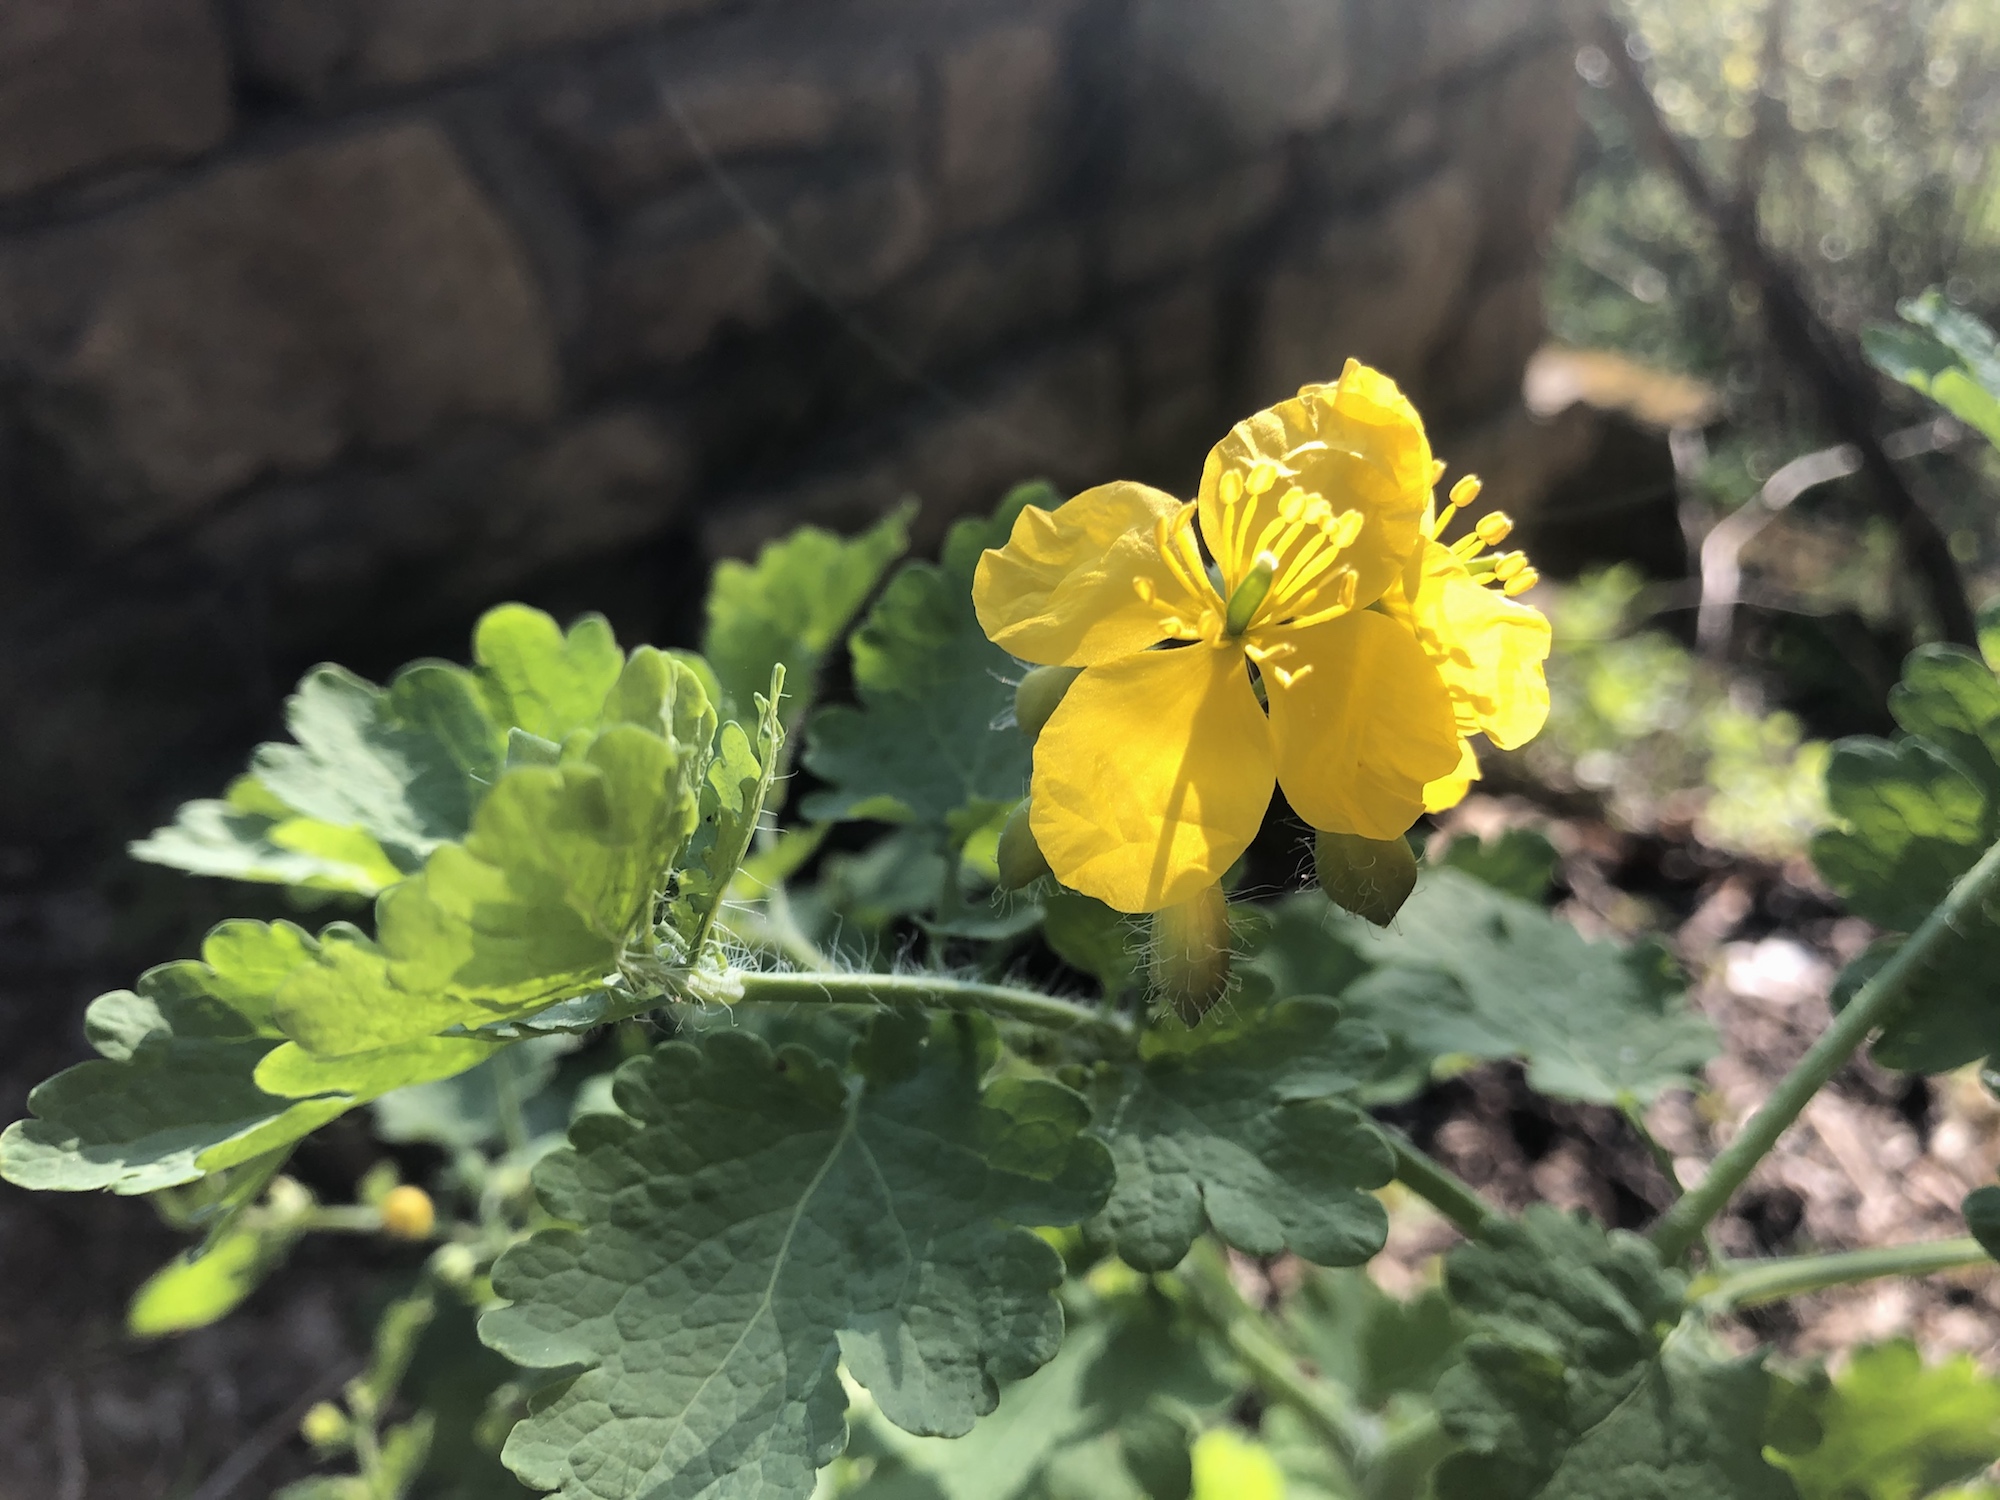 Greater Celandine by Duck Pond in Madison, Wisconsin on May 16, 2020.